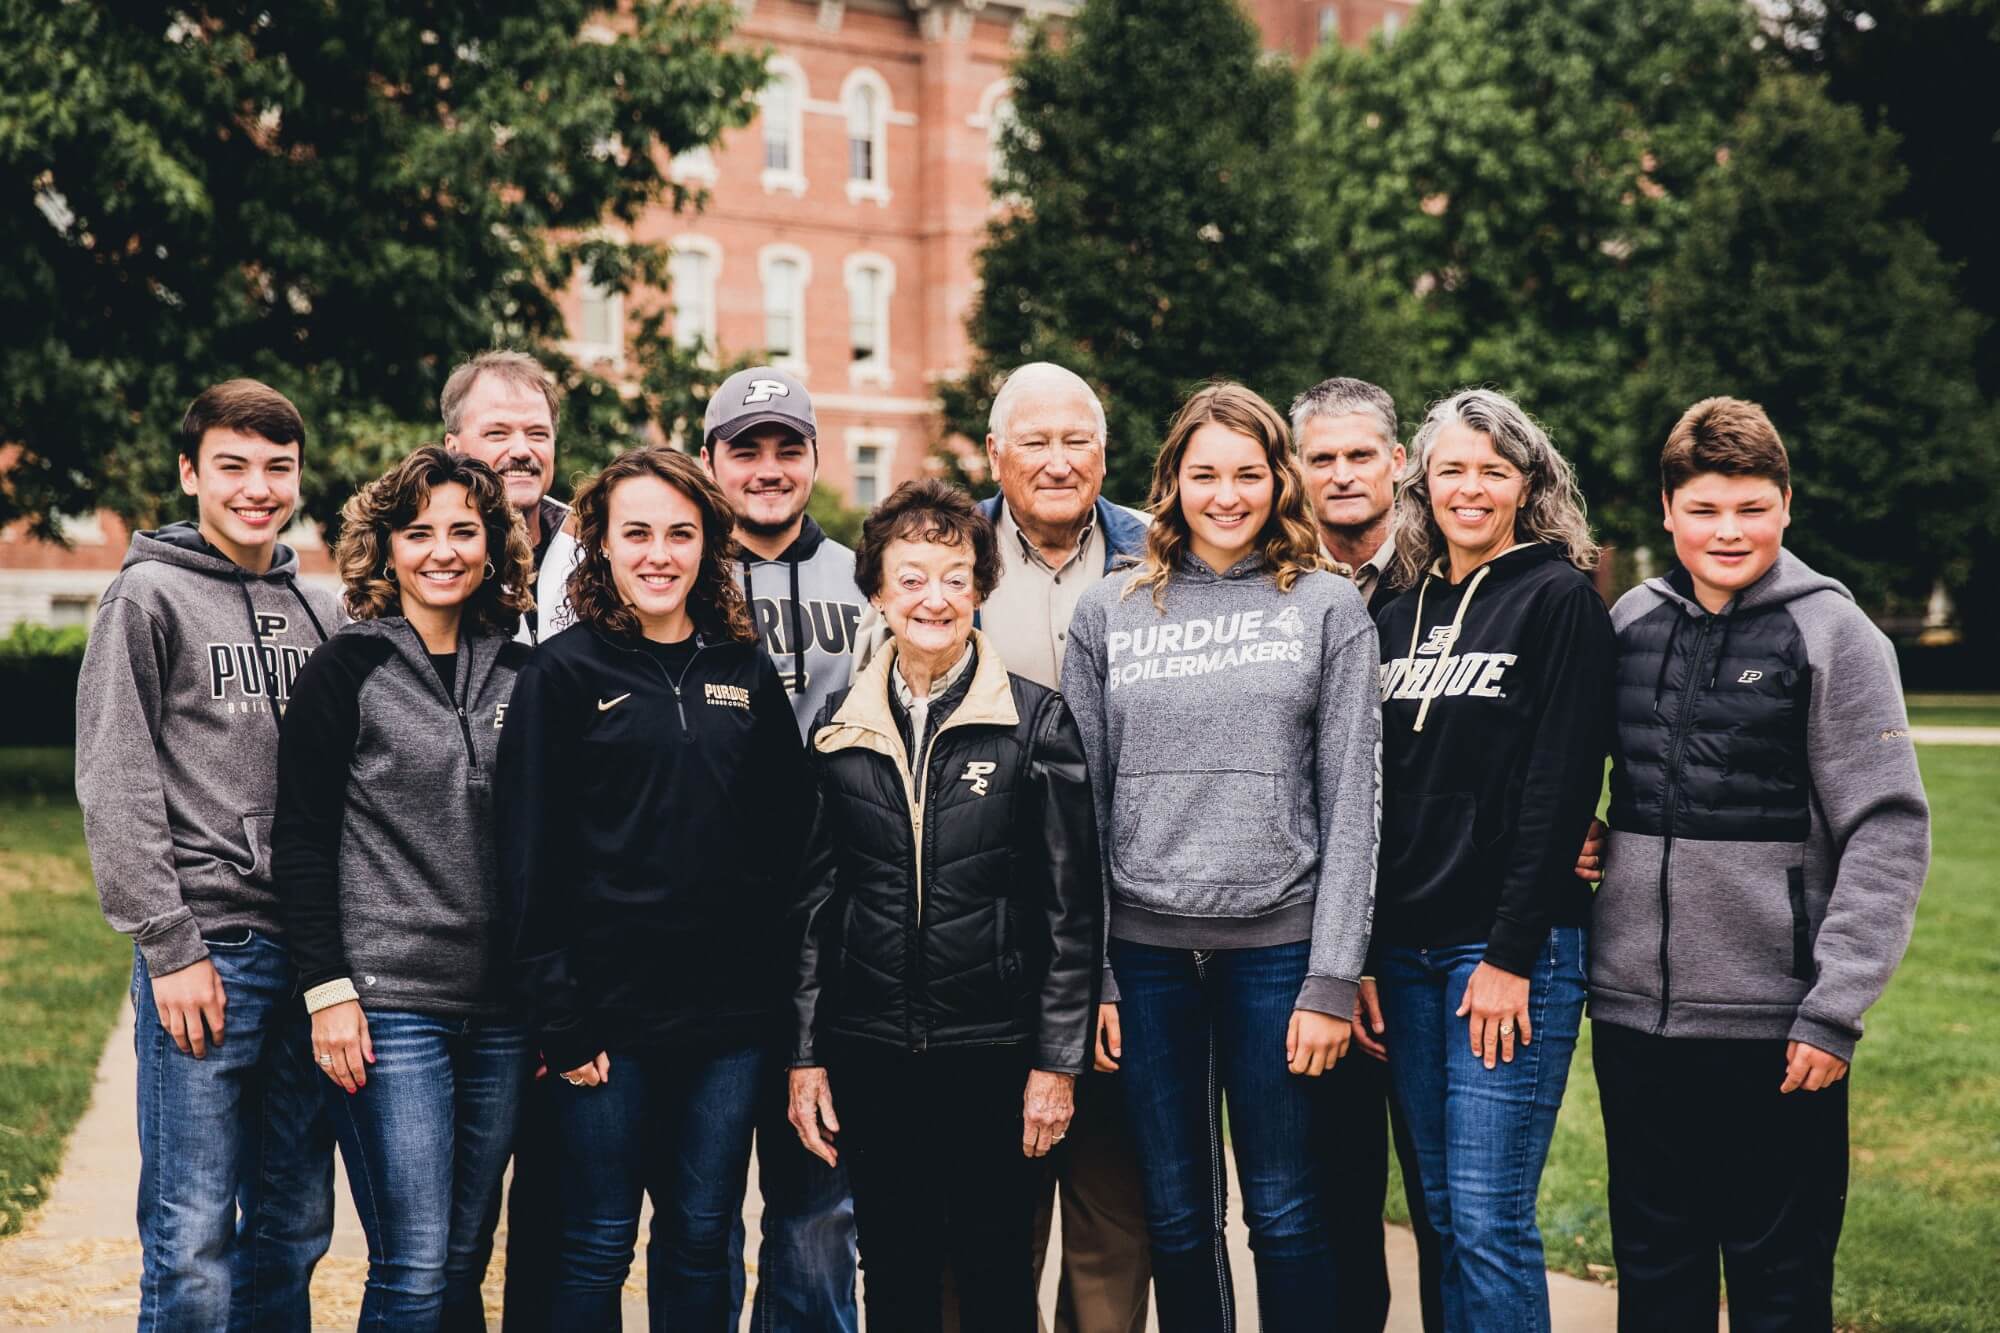 The Halderman family’s gift of a named chair was celebrated at Homecoming 2018.